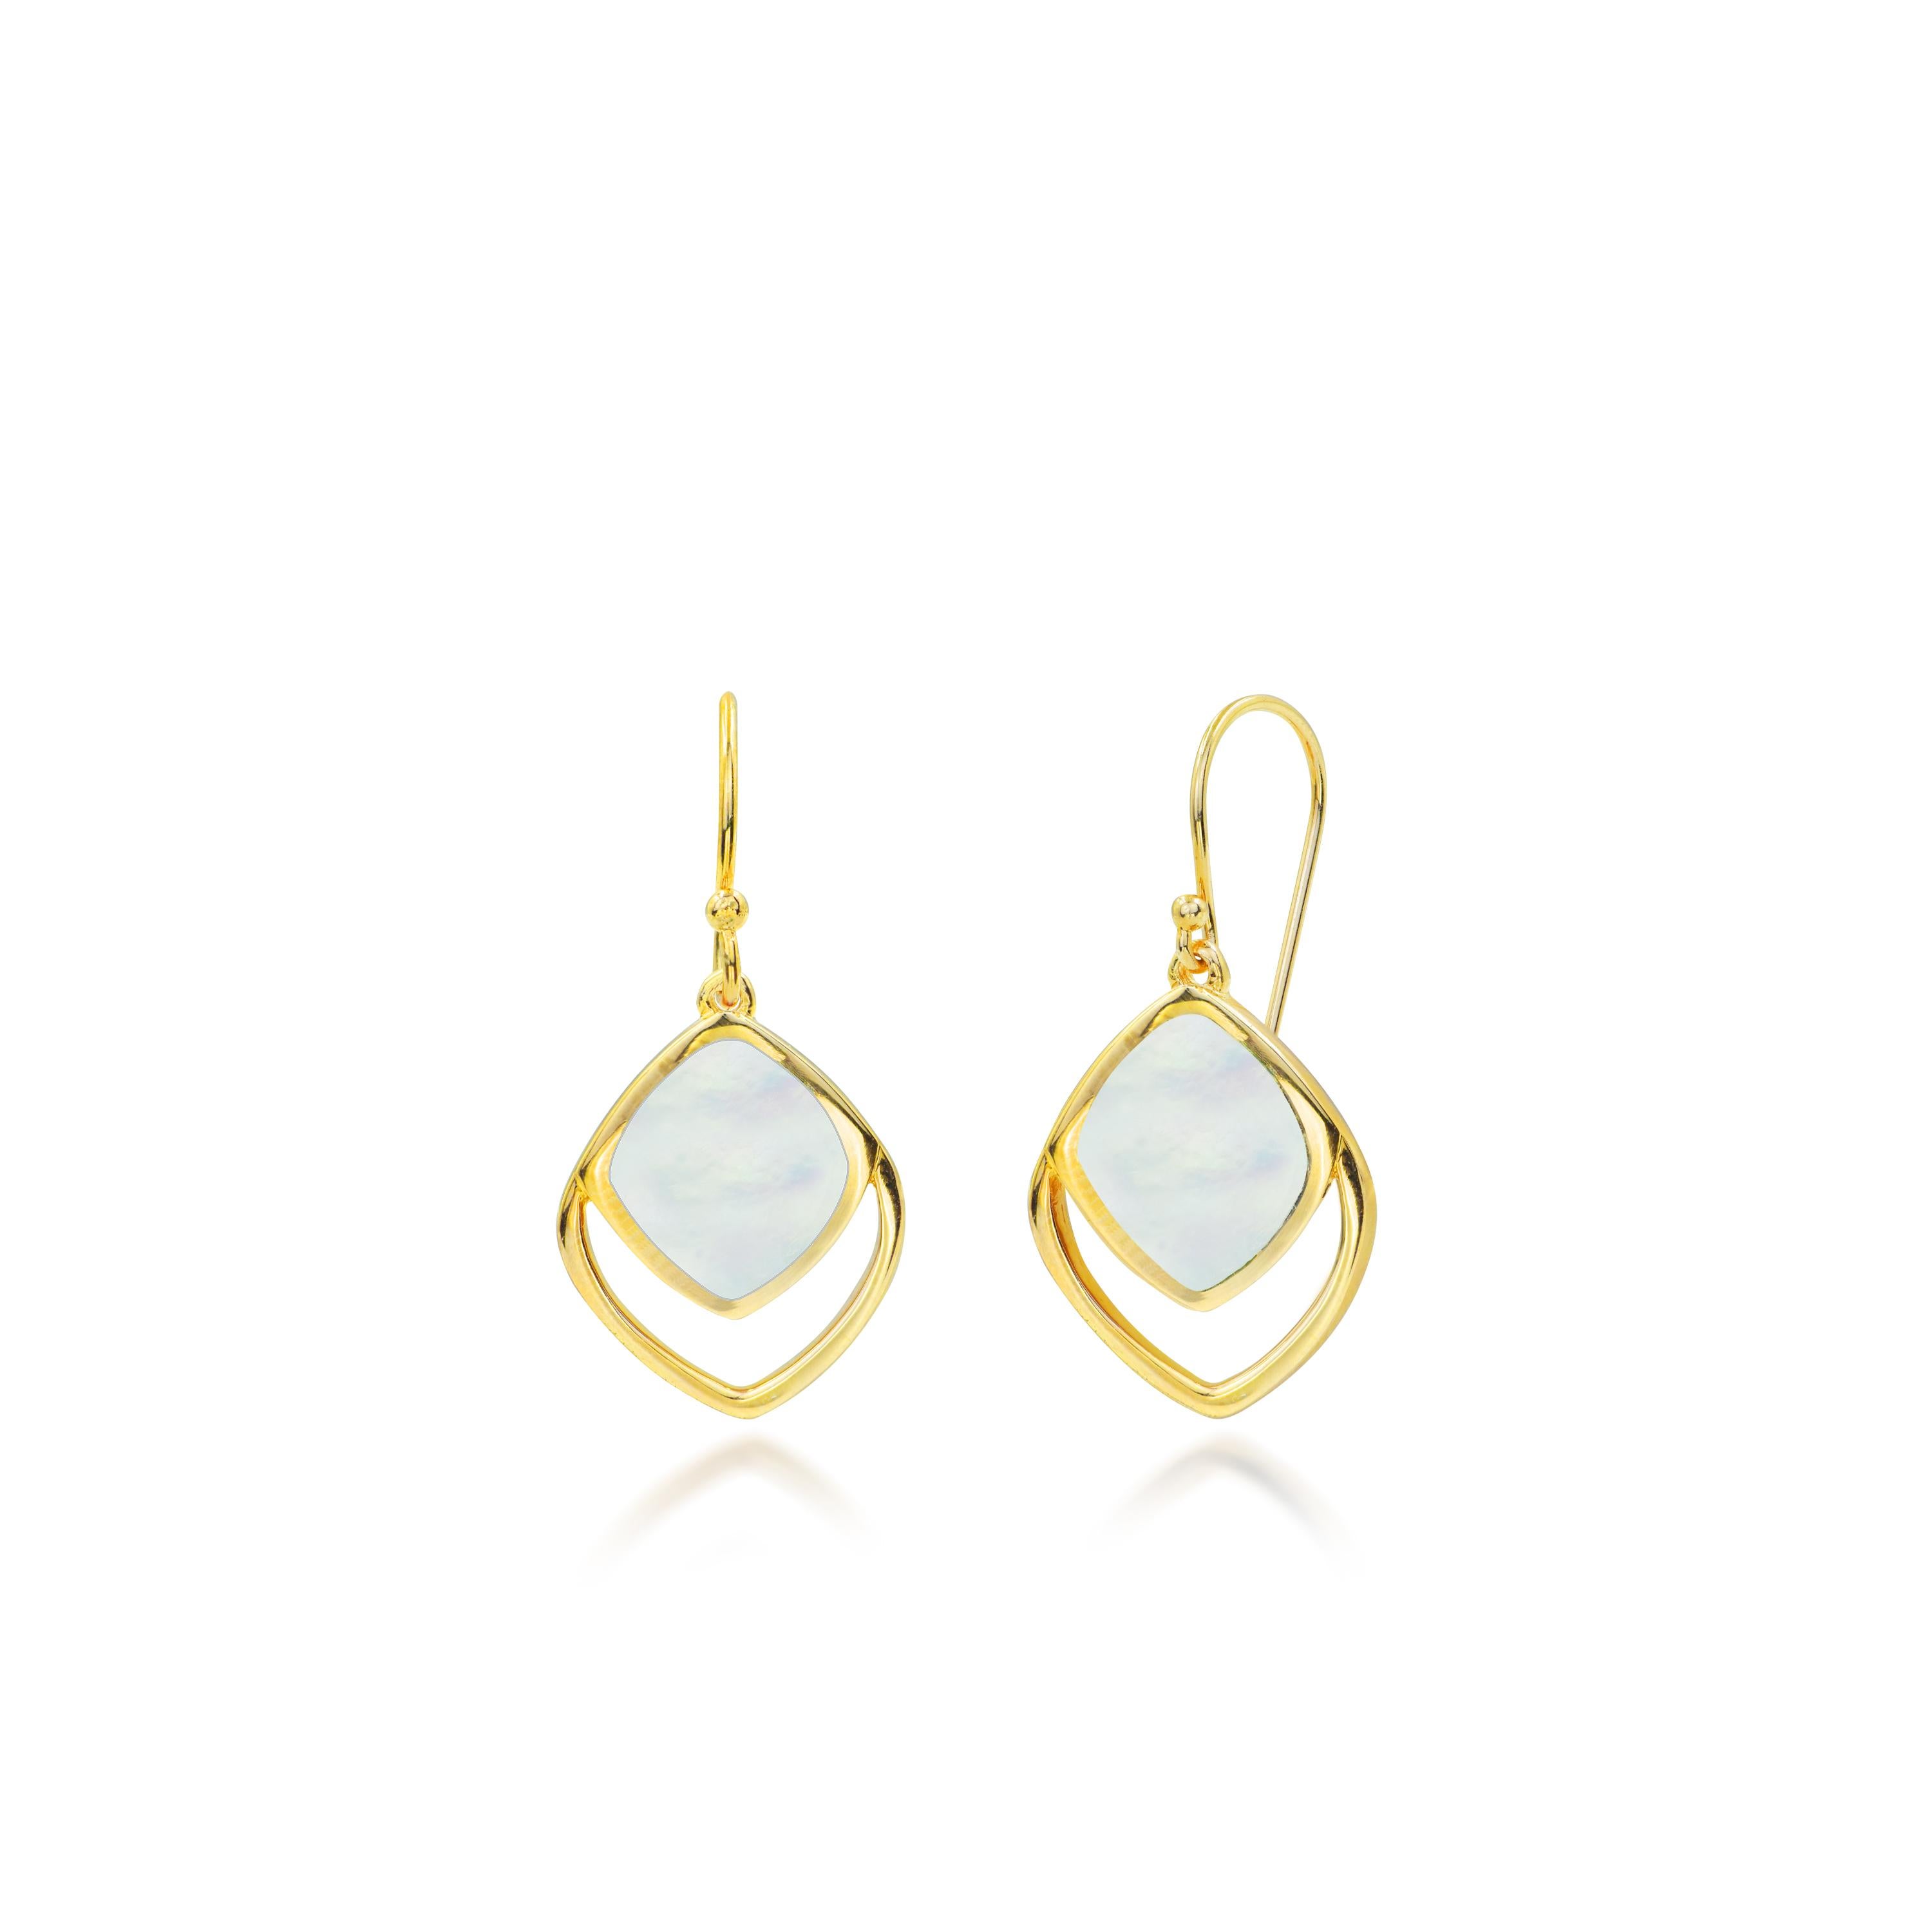 This unique dangle earrings combines the elegance and luxury of gold with the natural beauty of Mother of Pearl, Abalone, Tahitian Pearl and Grey shell. They can be a stylish and eye-catching accessory for various occasions, adding a touch of